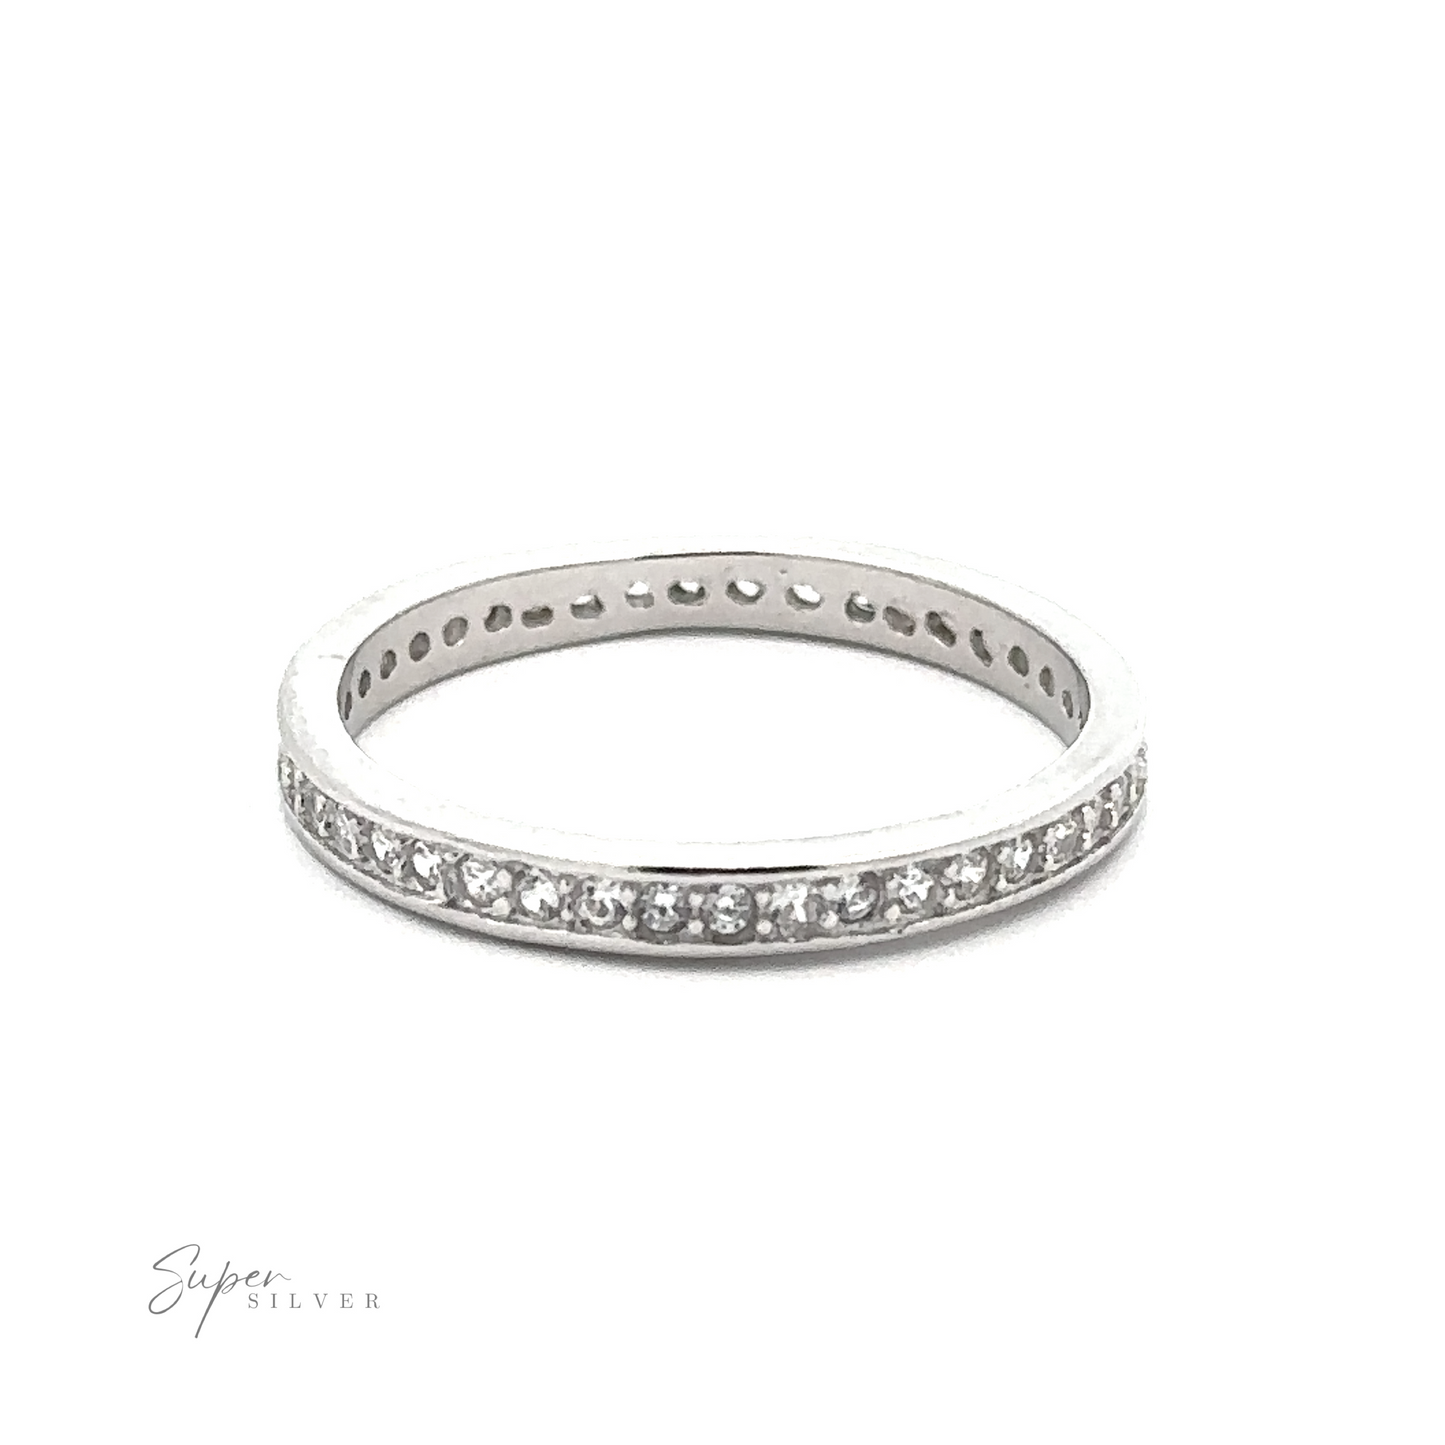 
                  
                    A *Classic Pave Cubic Zirconia Eternity Ring* crafted from .925 Sterling Silver, adorned with small, round cubic zirconia stones around its circumference, is positioned against a white background. The words "Super Silver" are written in the bottom left corner.
                  
                